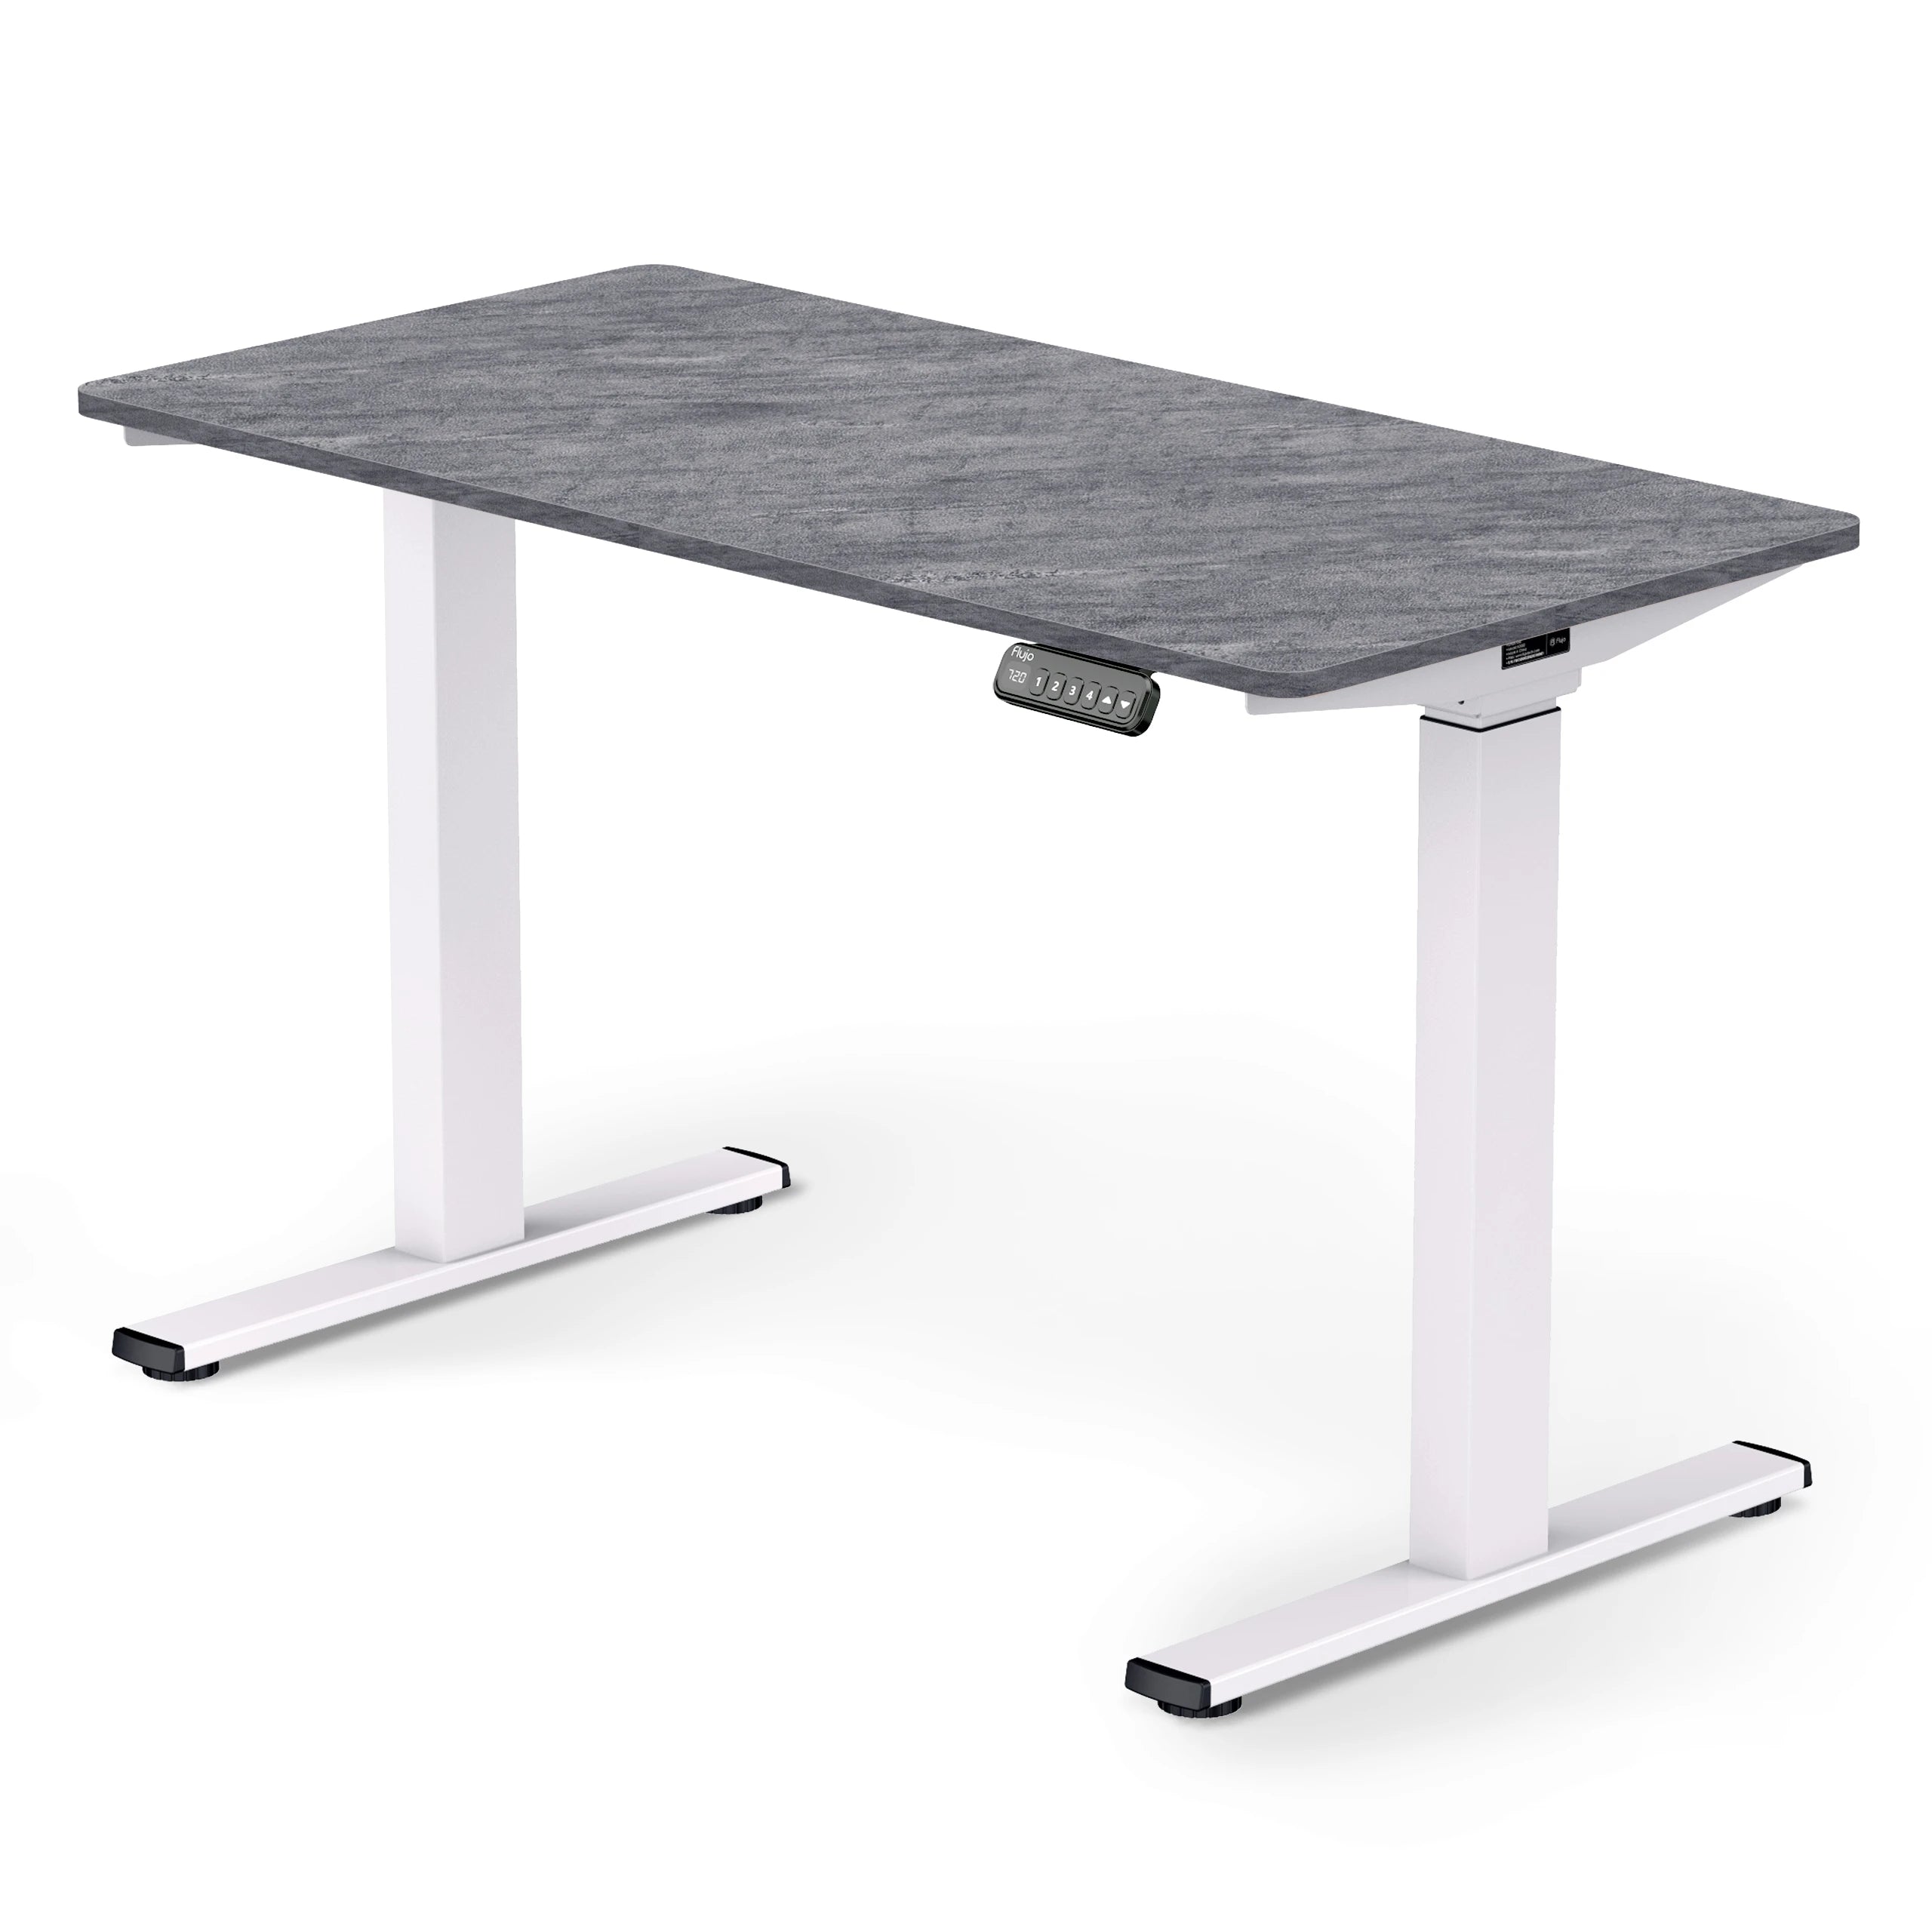 Adjustable height standing desk with a Rock Grey colour table  top and white legs frame, featuring a digital keypad control panel